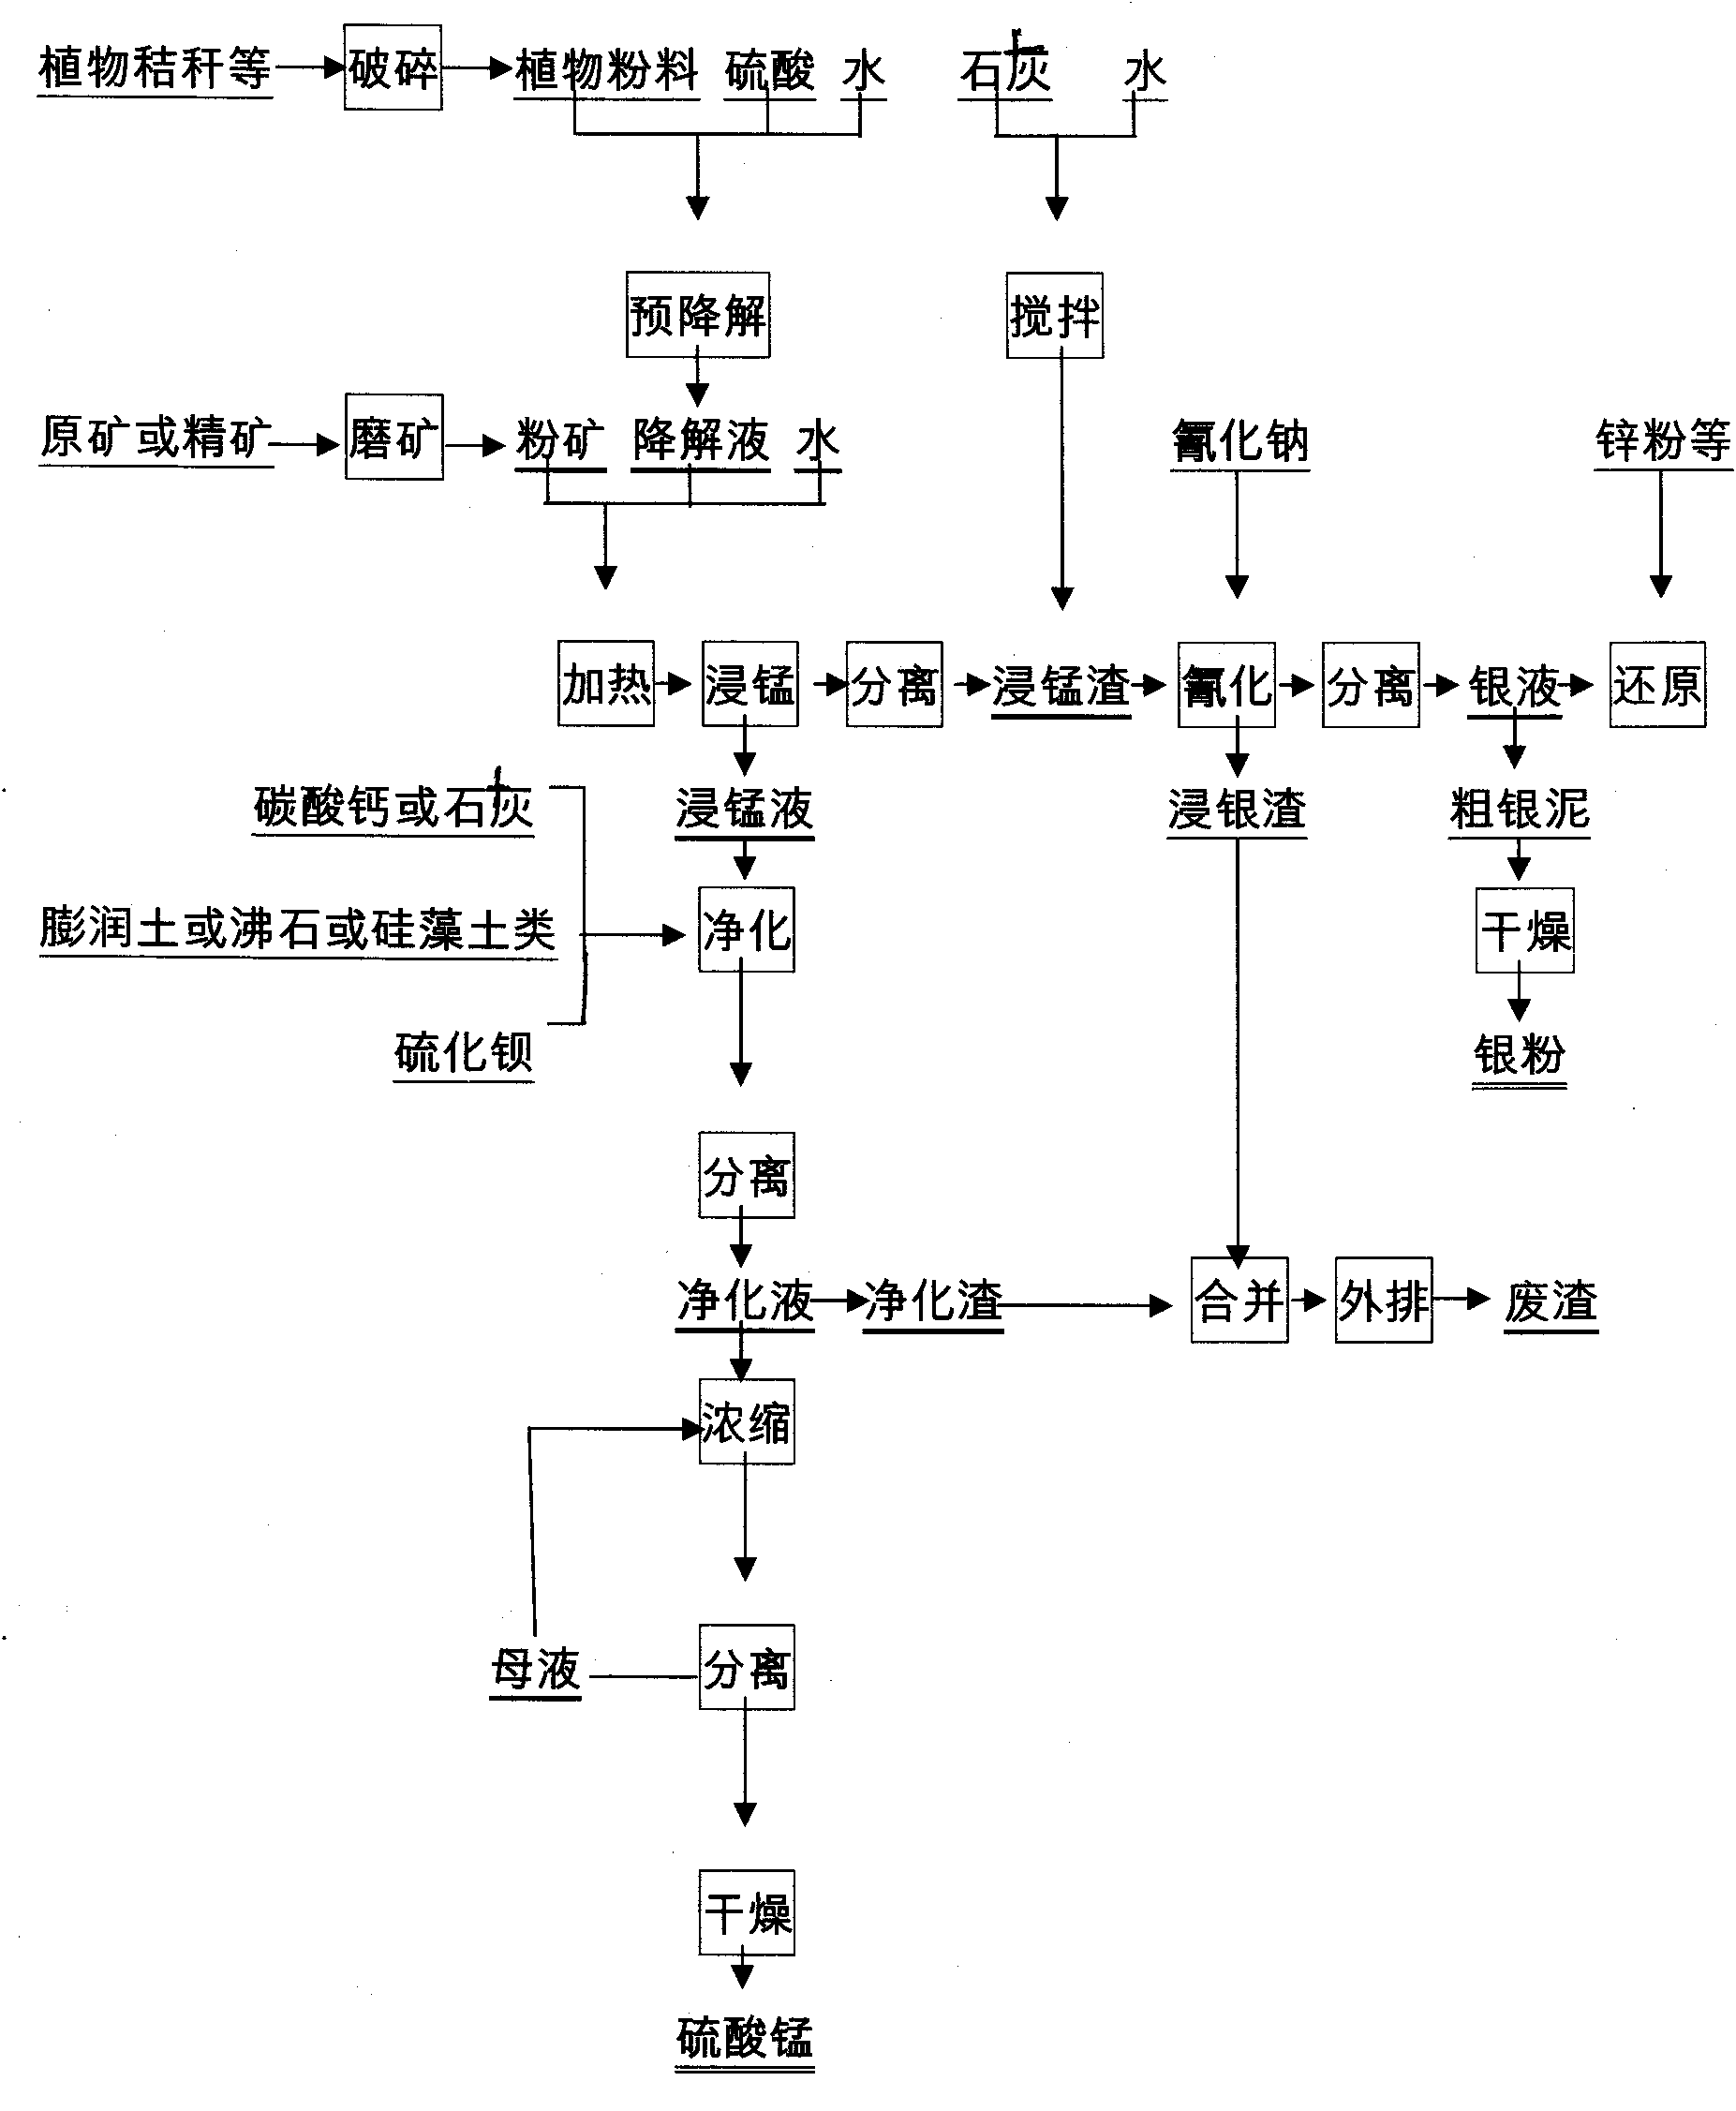 Method for separating manganese and silver of manganese-silver ore and extracting manganese sulfate by purifying manganese dipped solution